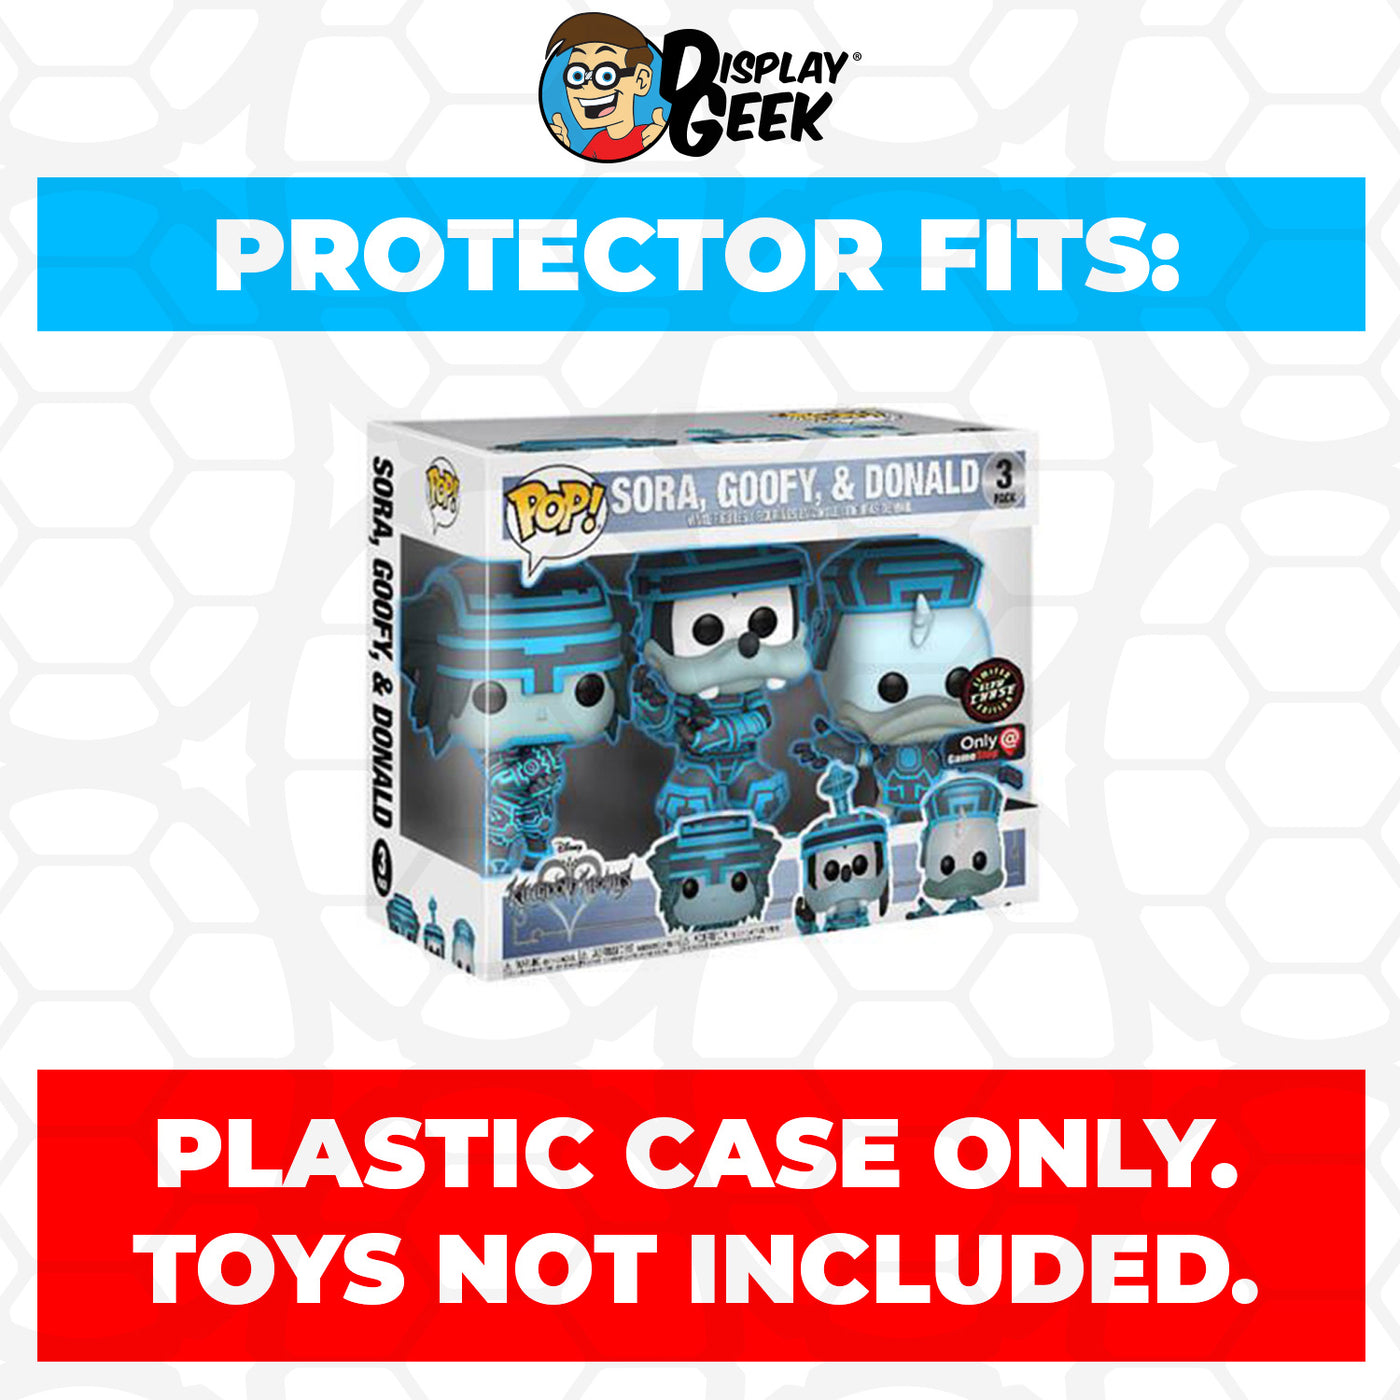 Pop Protector for 3 Pack Kingdom Hearts Sora, Goofy & Donald Tron Funko Pop on The Protector Guide App by Display Geek